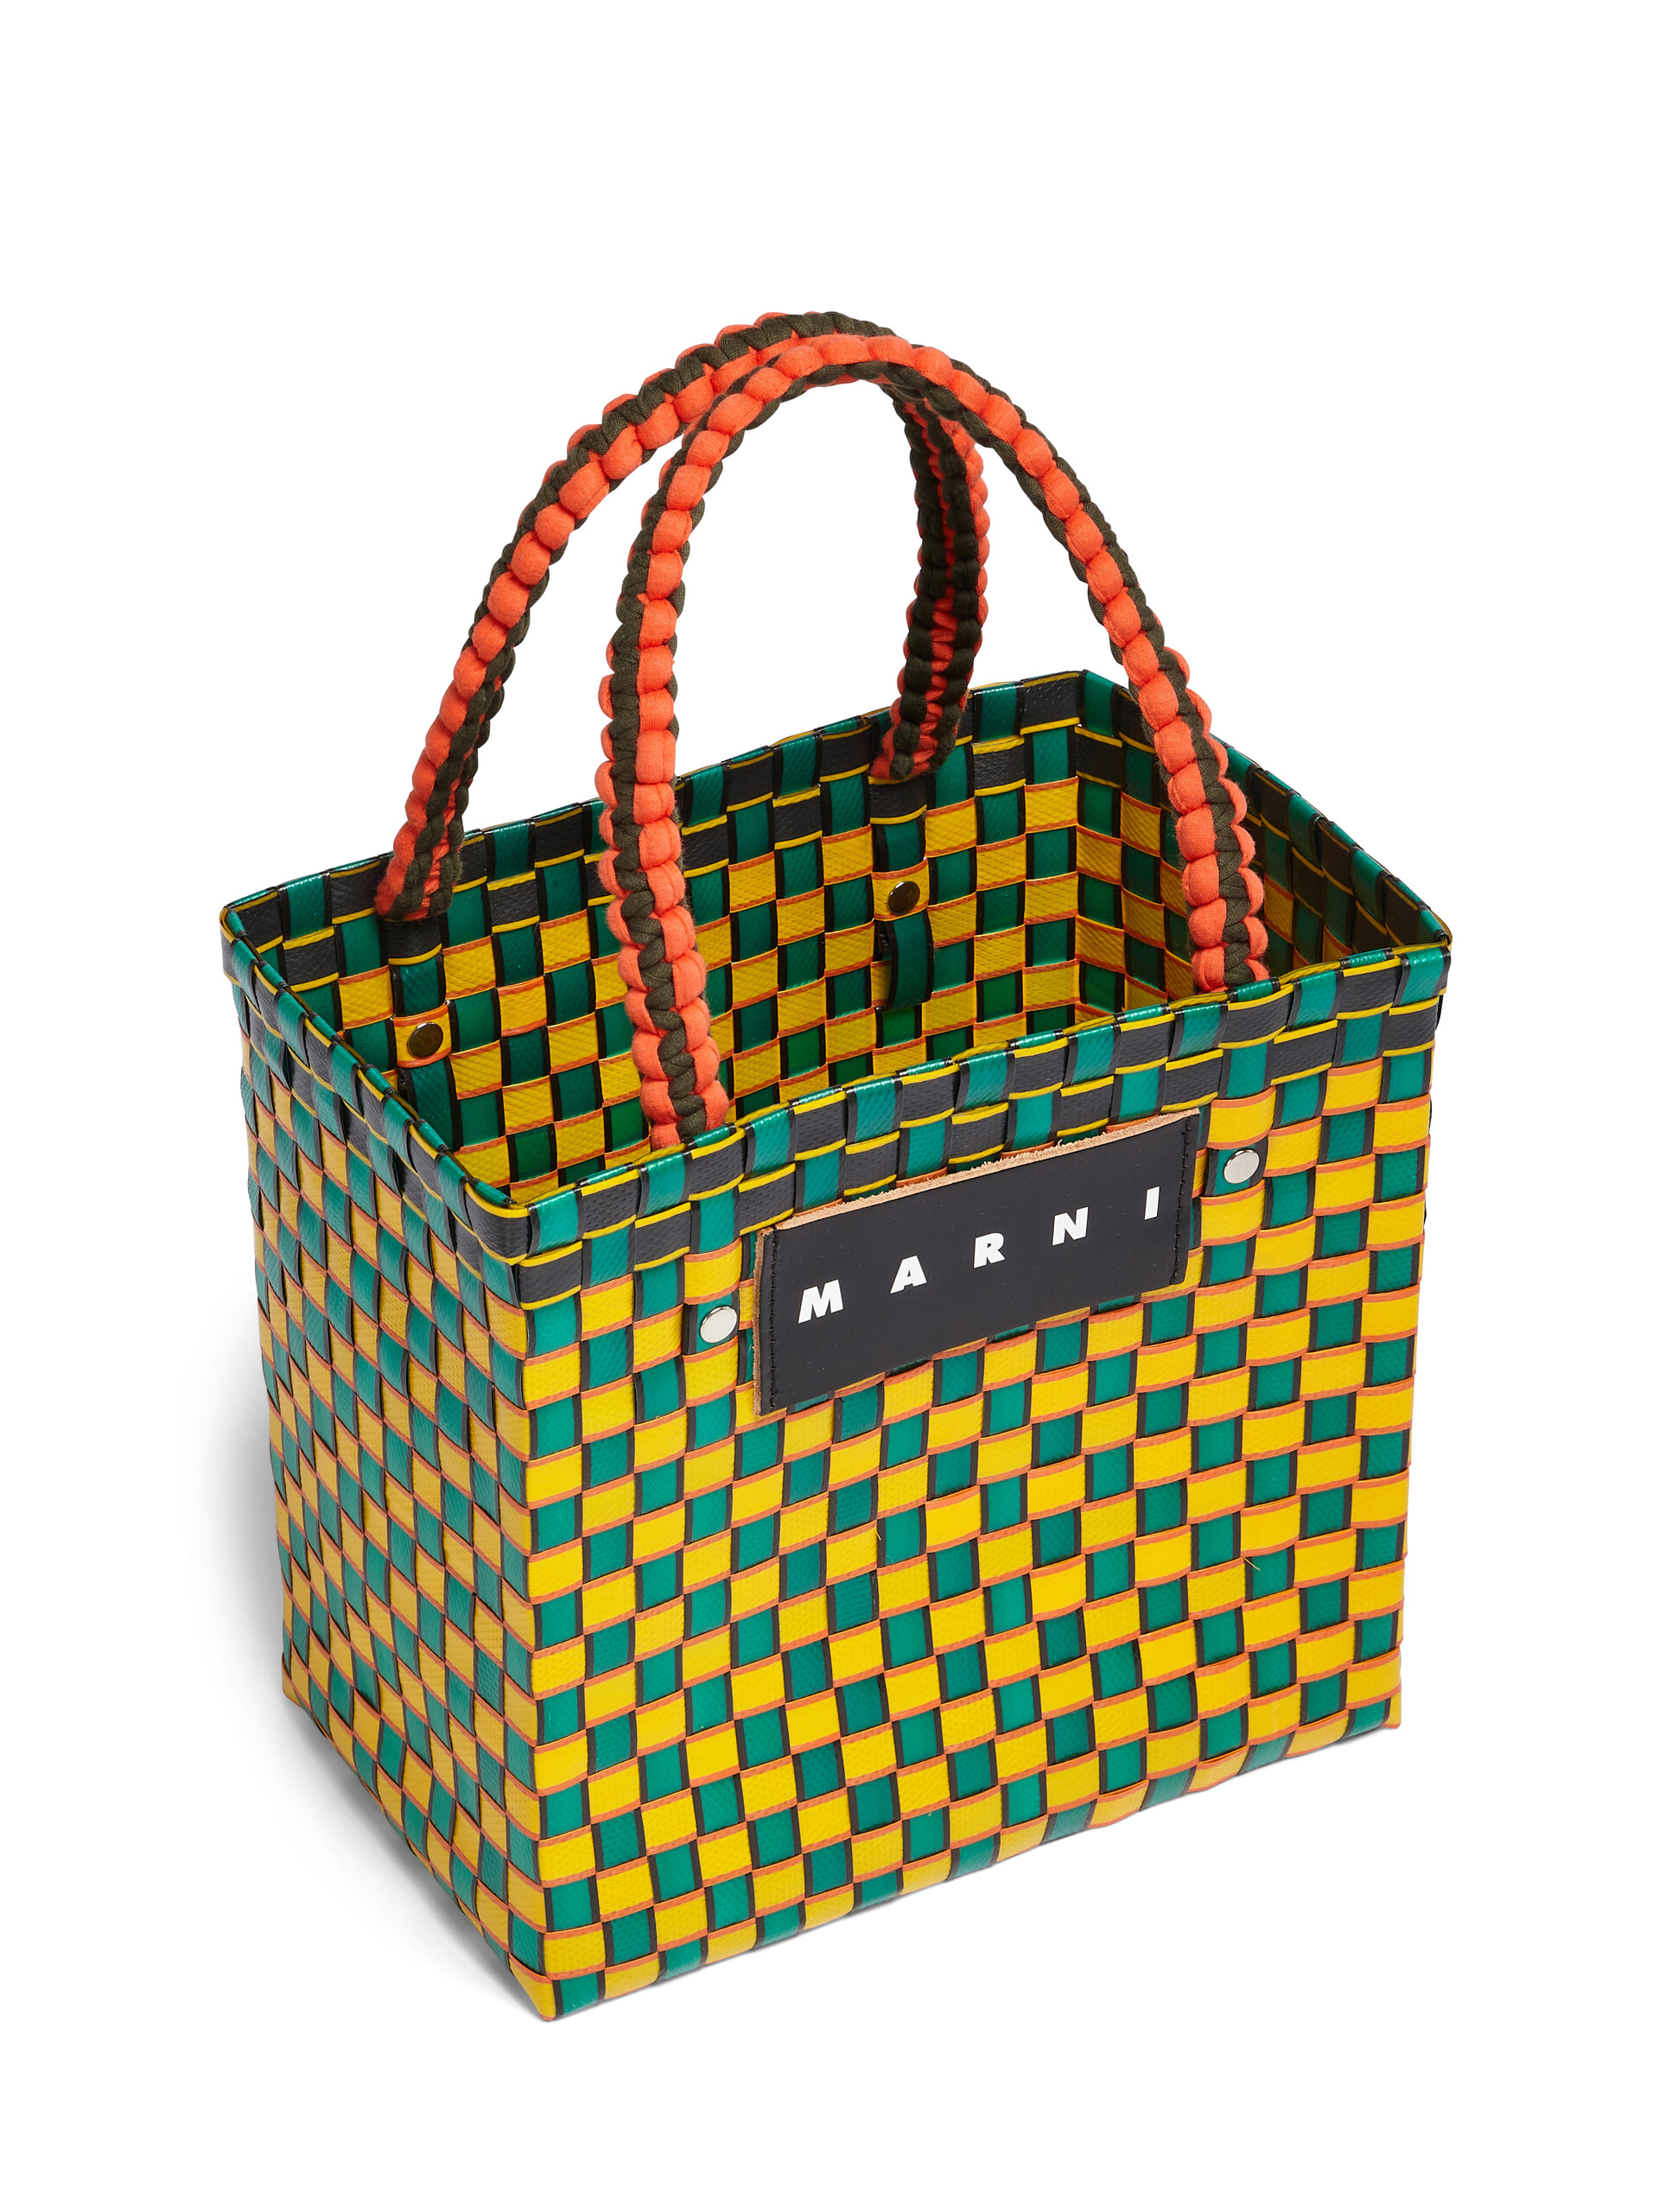 MARNI MARKET BASKET bag in yellow square woven material - Bags - Image 4